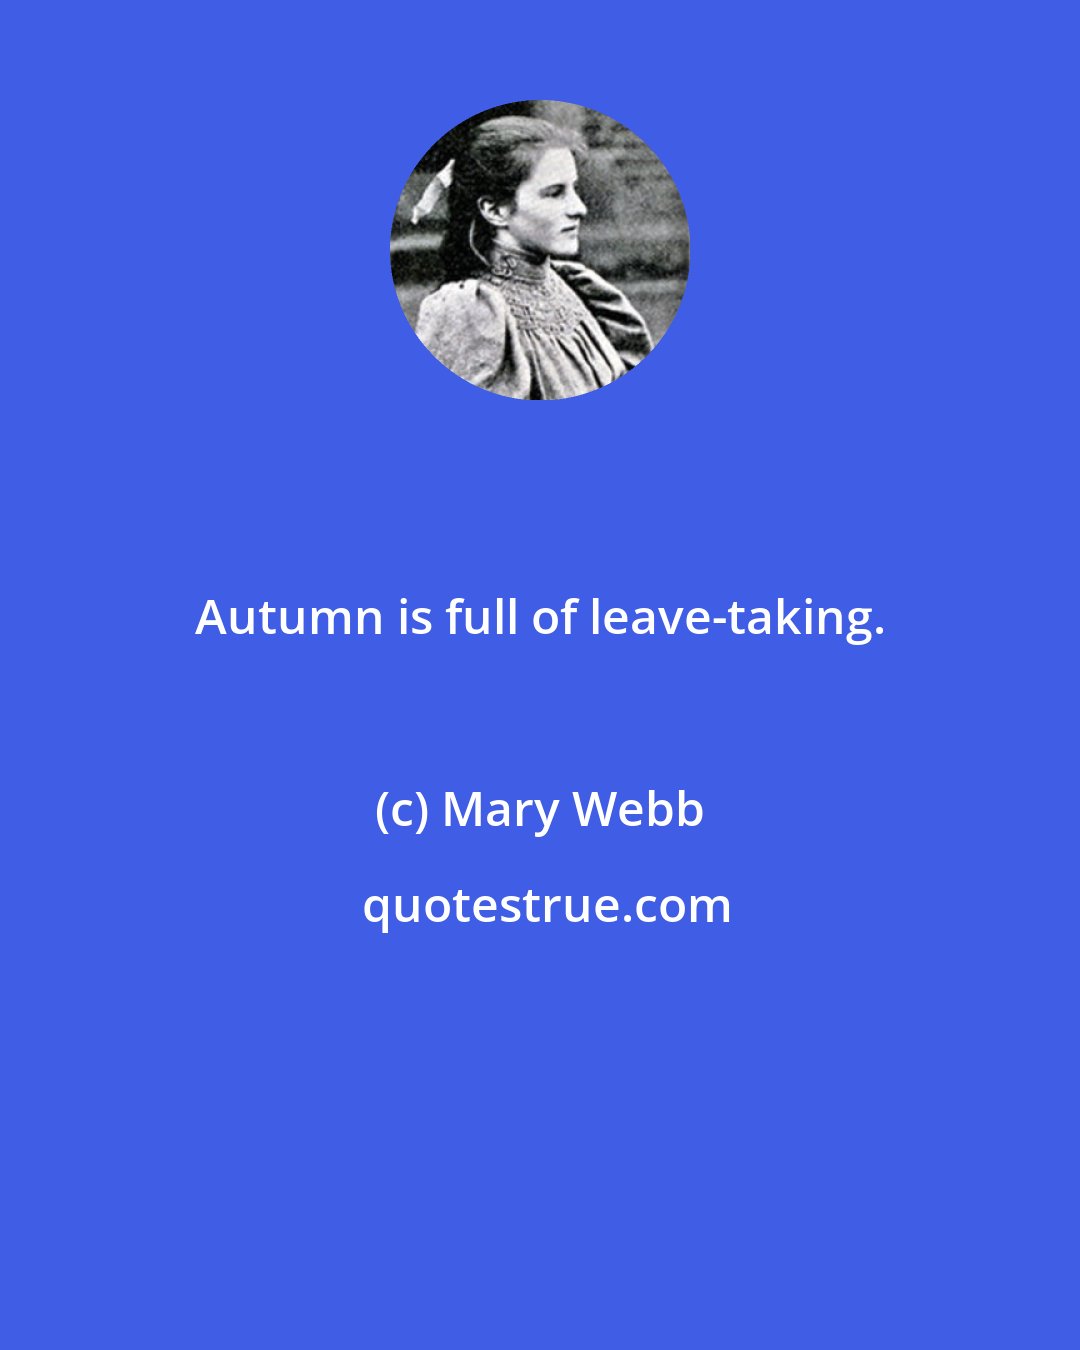 Mary Webb: Autumn is full of leave-taking.